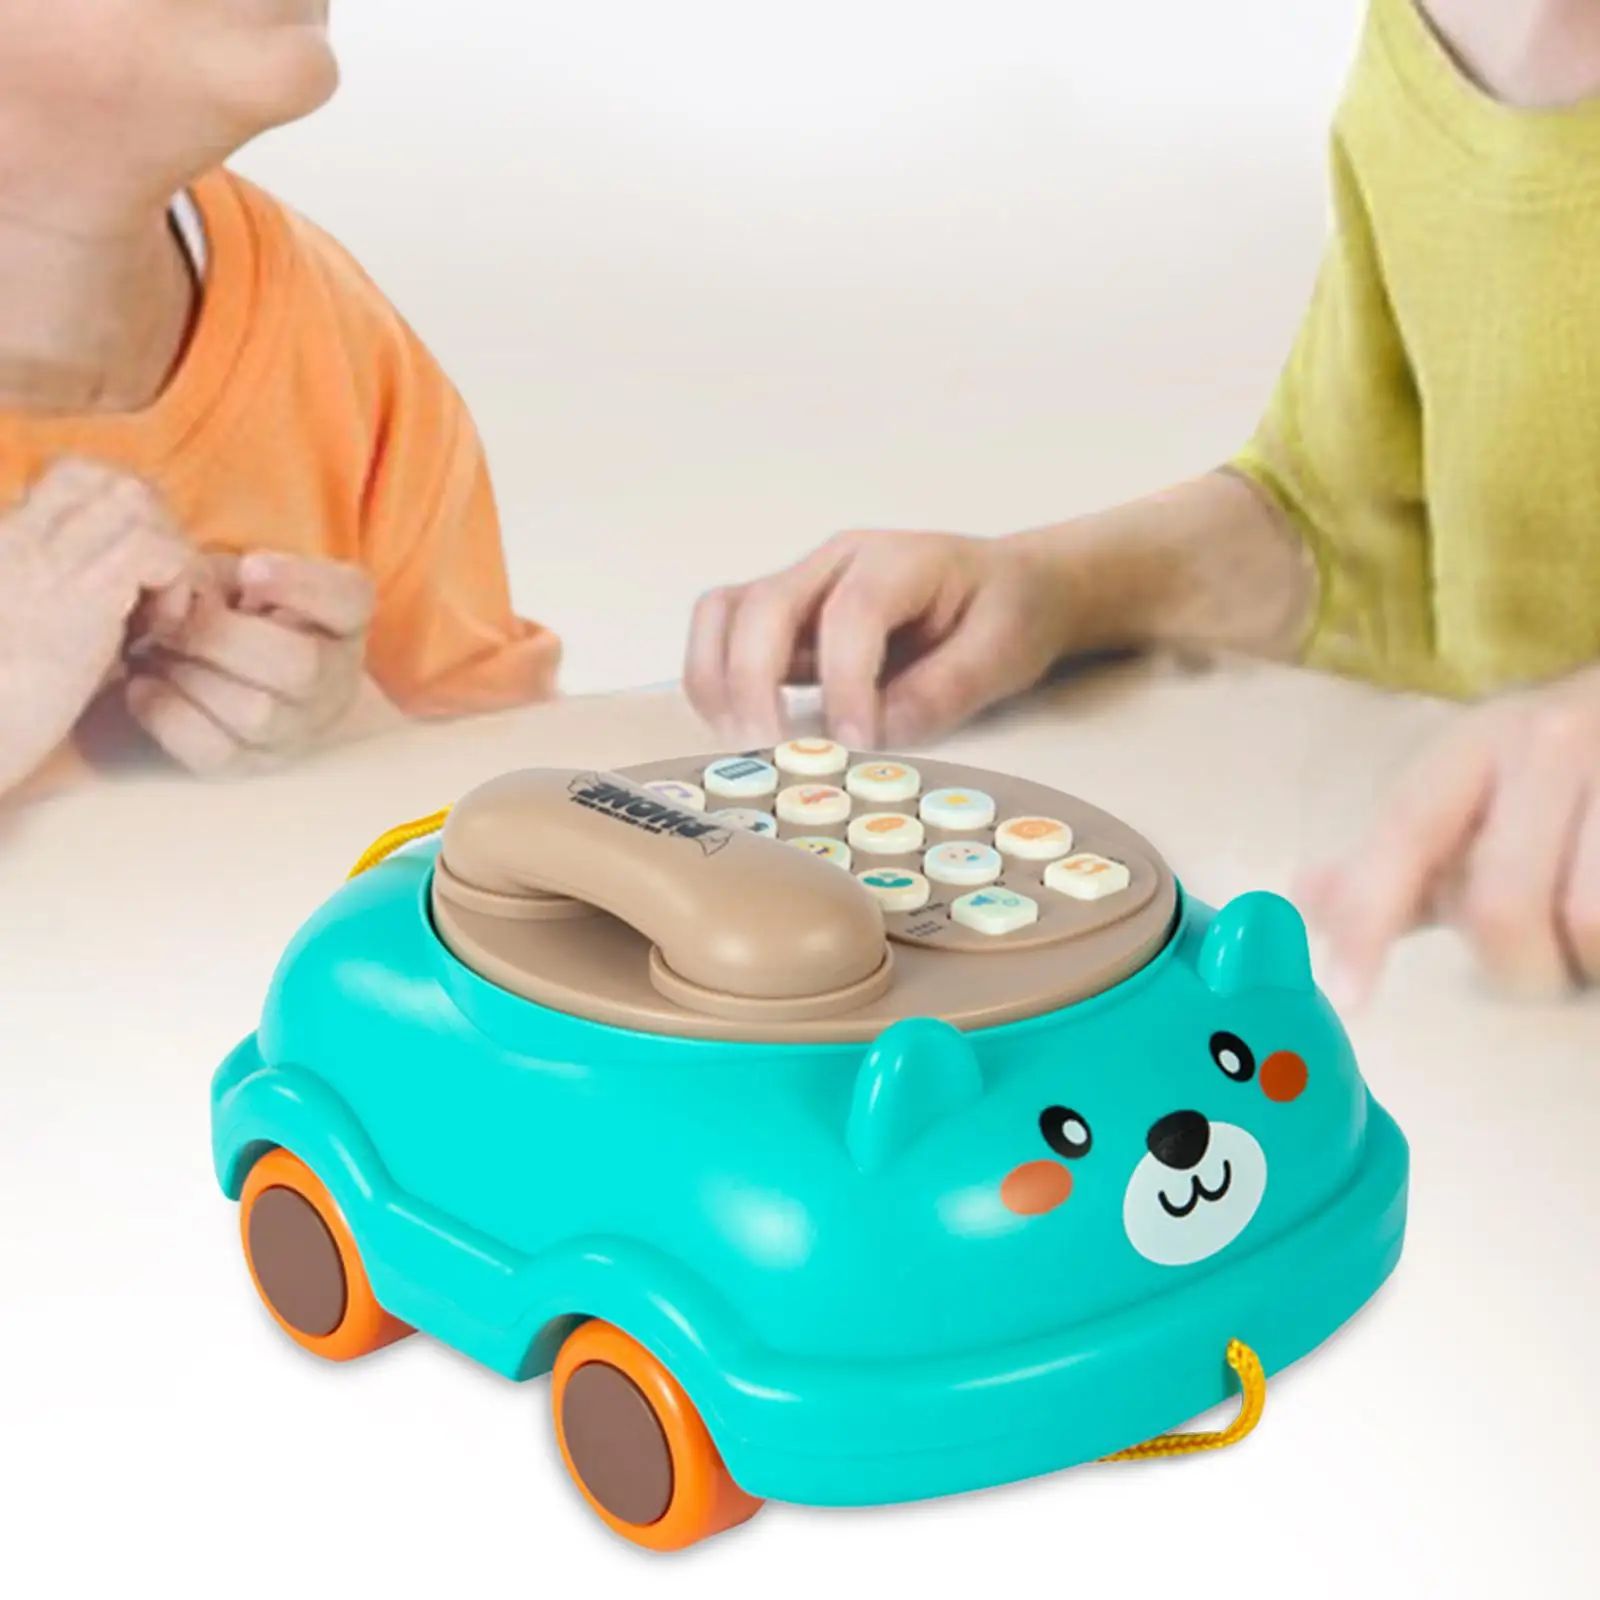 Cognitive Development Toy Piano Baby Phones Toy Early Learning Toy for Girl and Boys 3 Years Old Early Education Gift Children